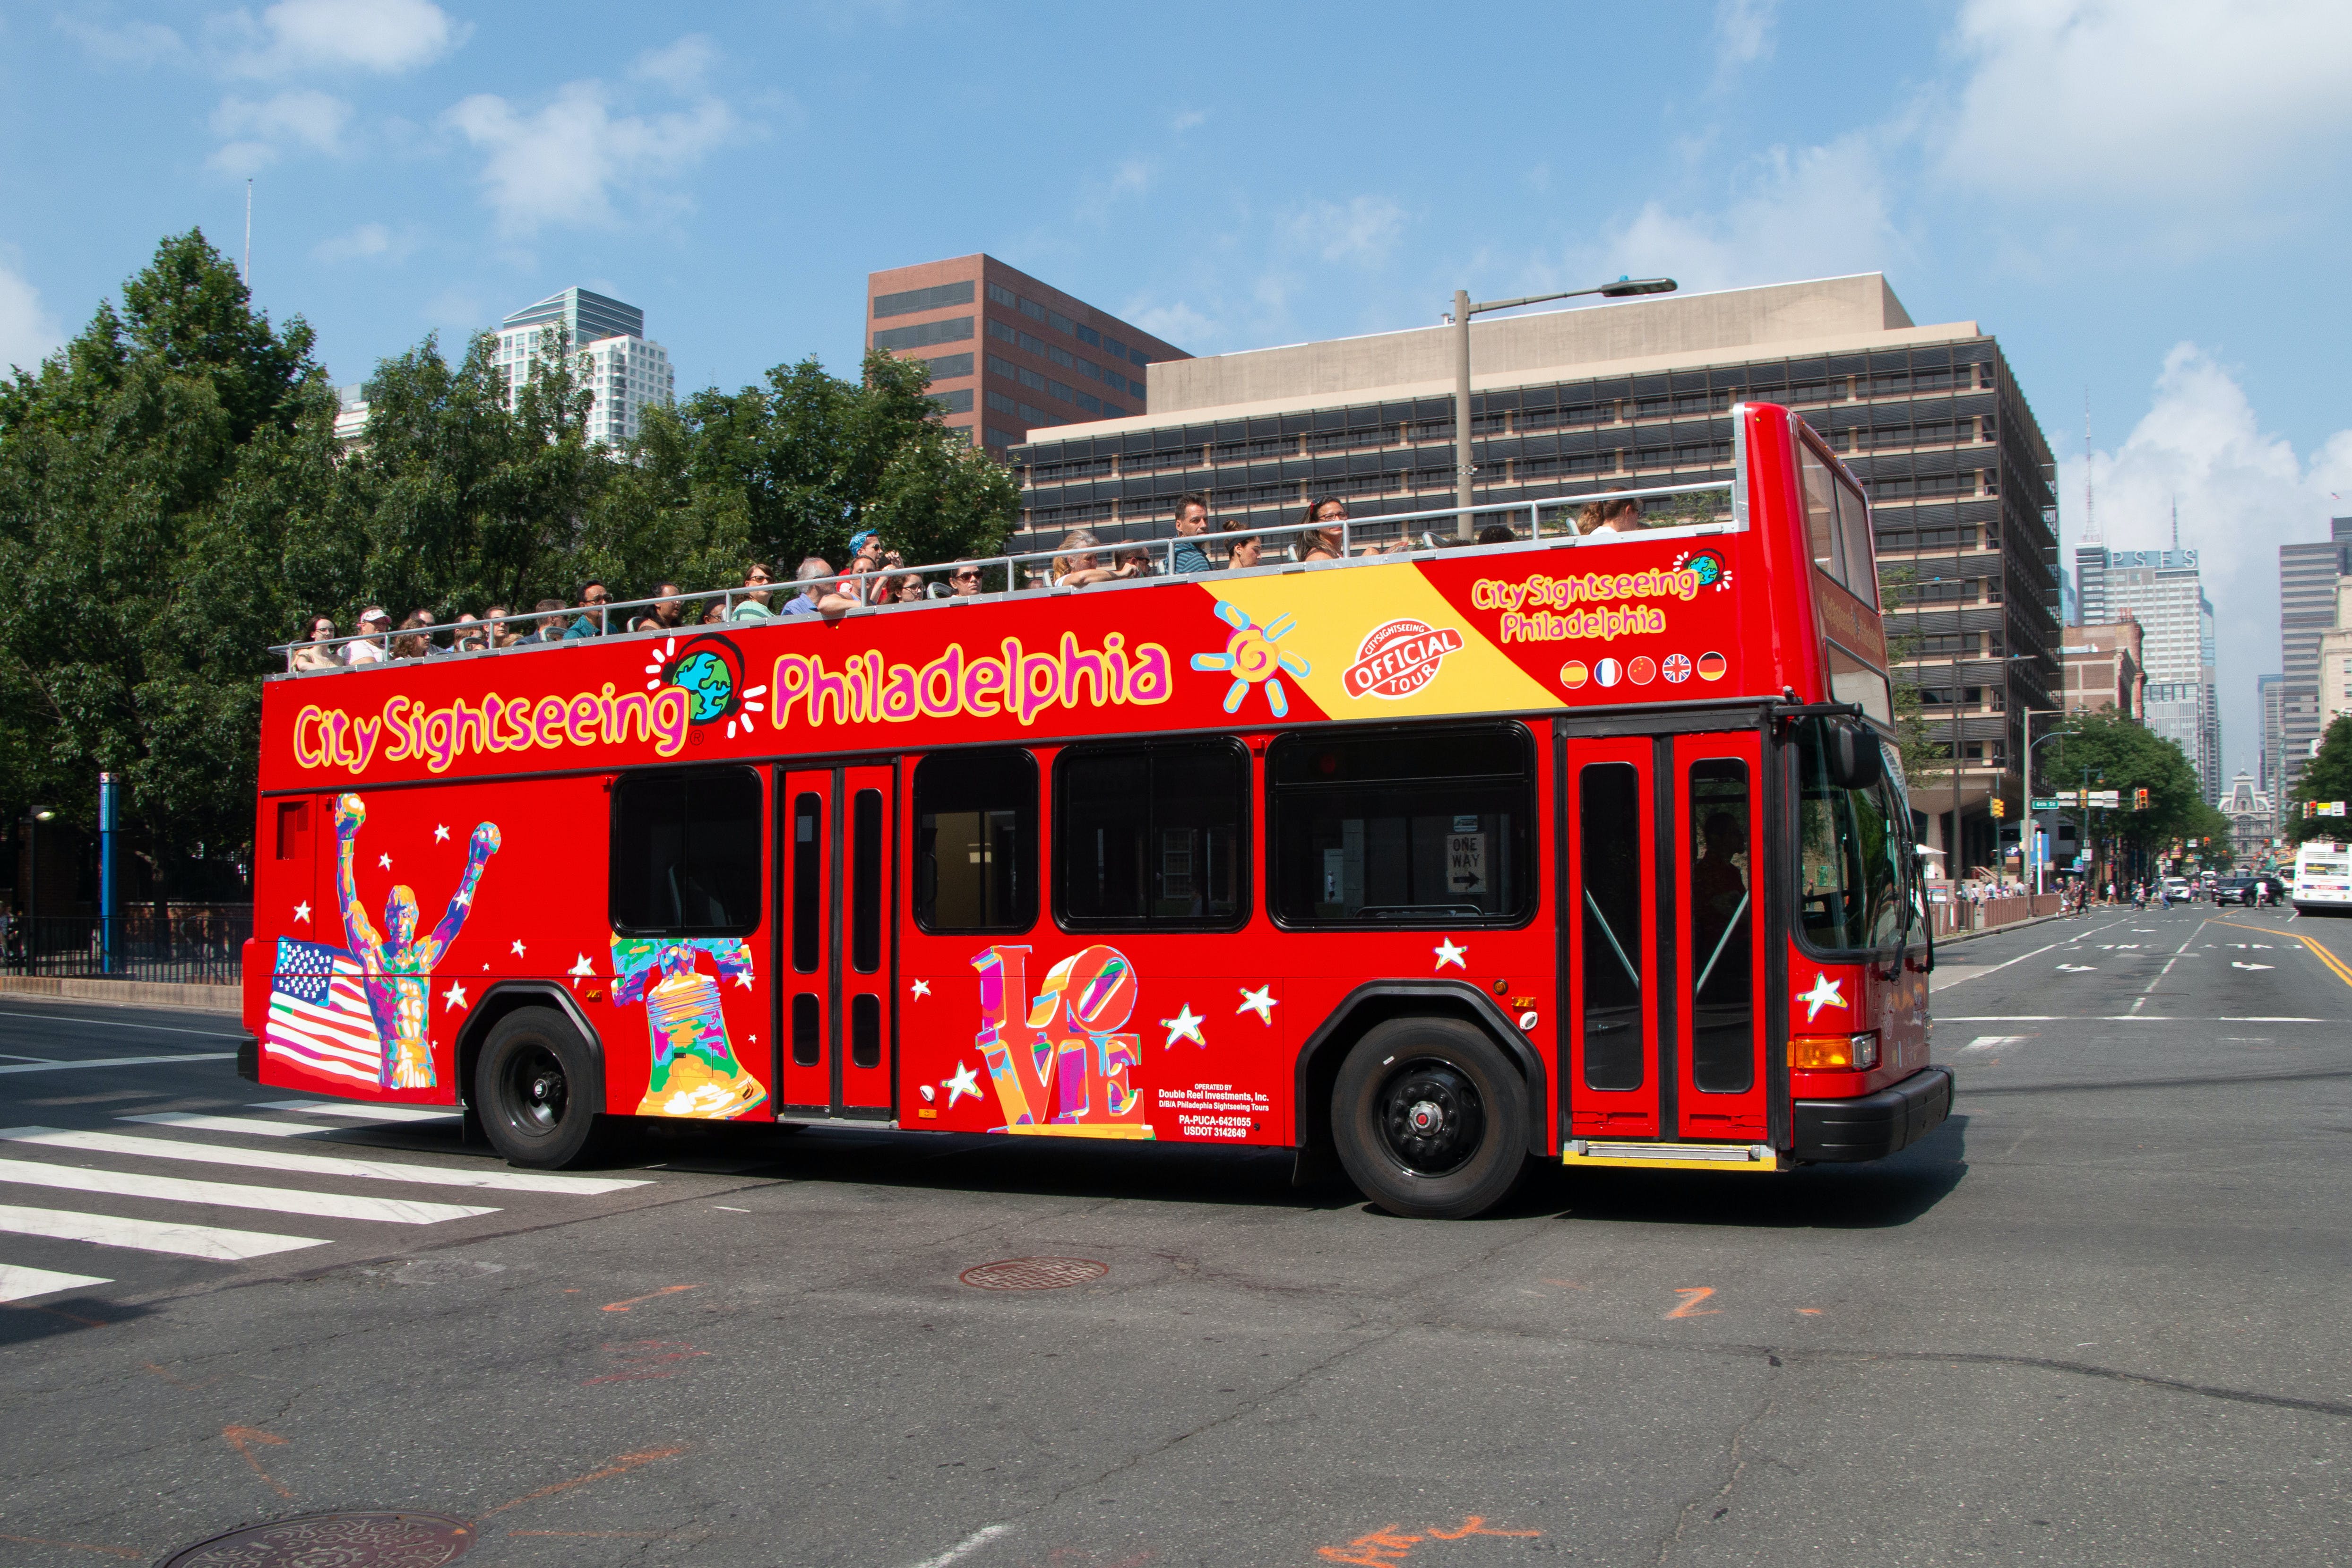 Tour in autobus hop-on hop-off di City Sightseeing di Filadelfia